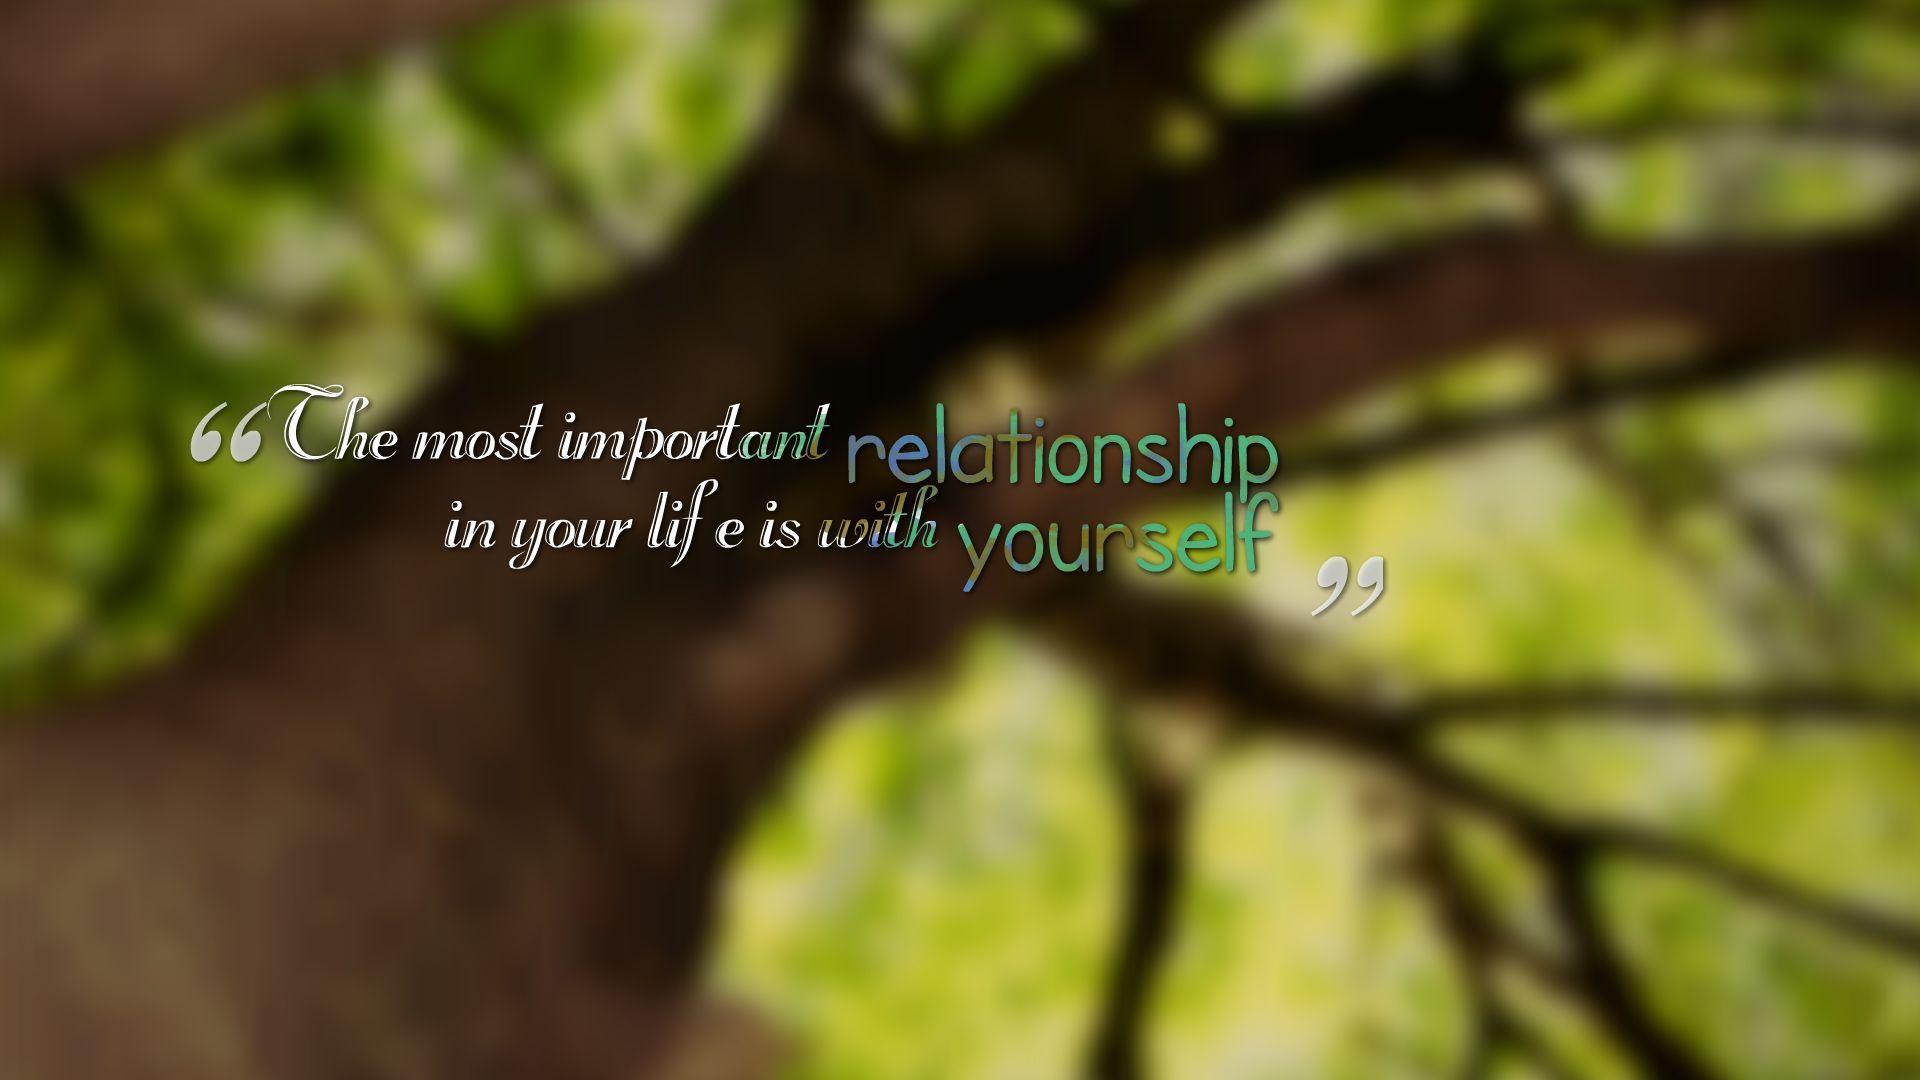 The most important relationship widescreen wallpaper. Wide